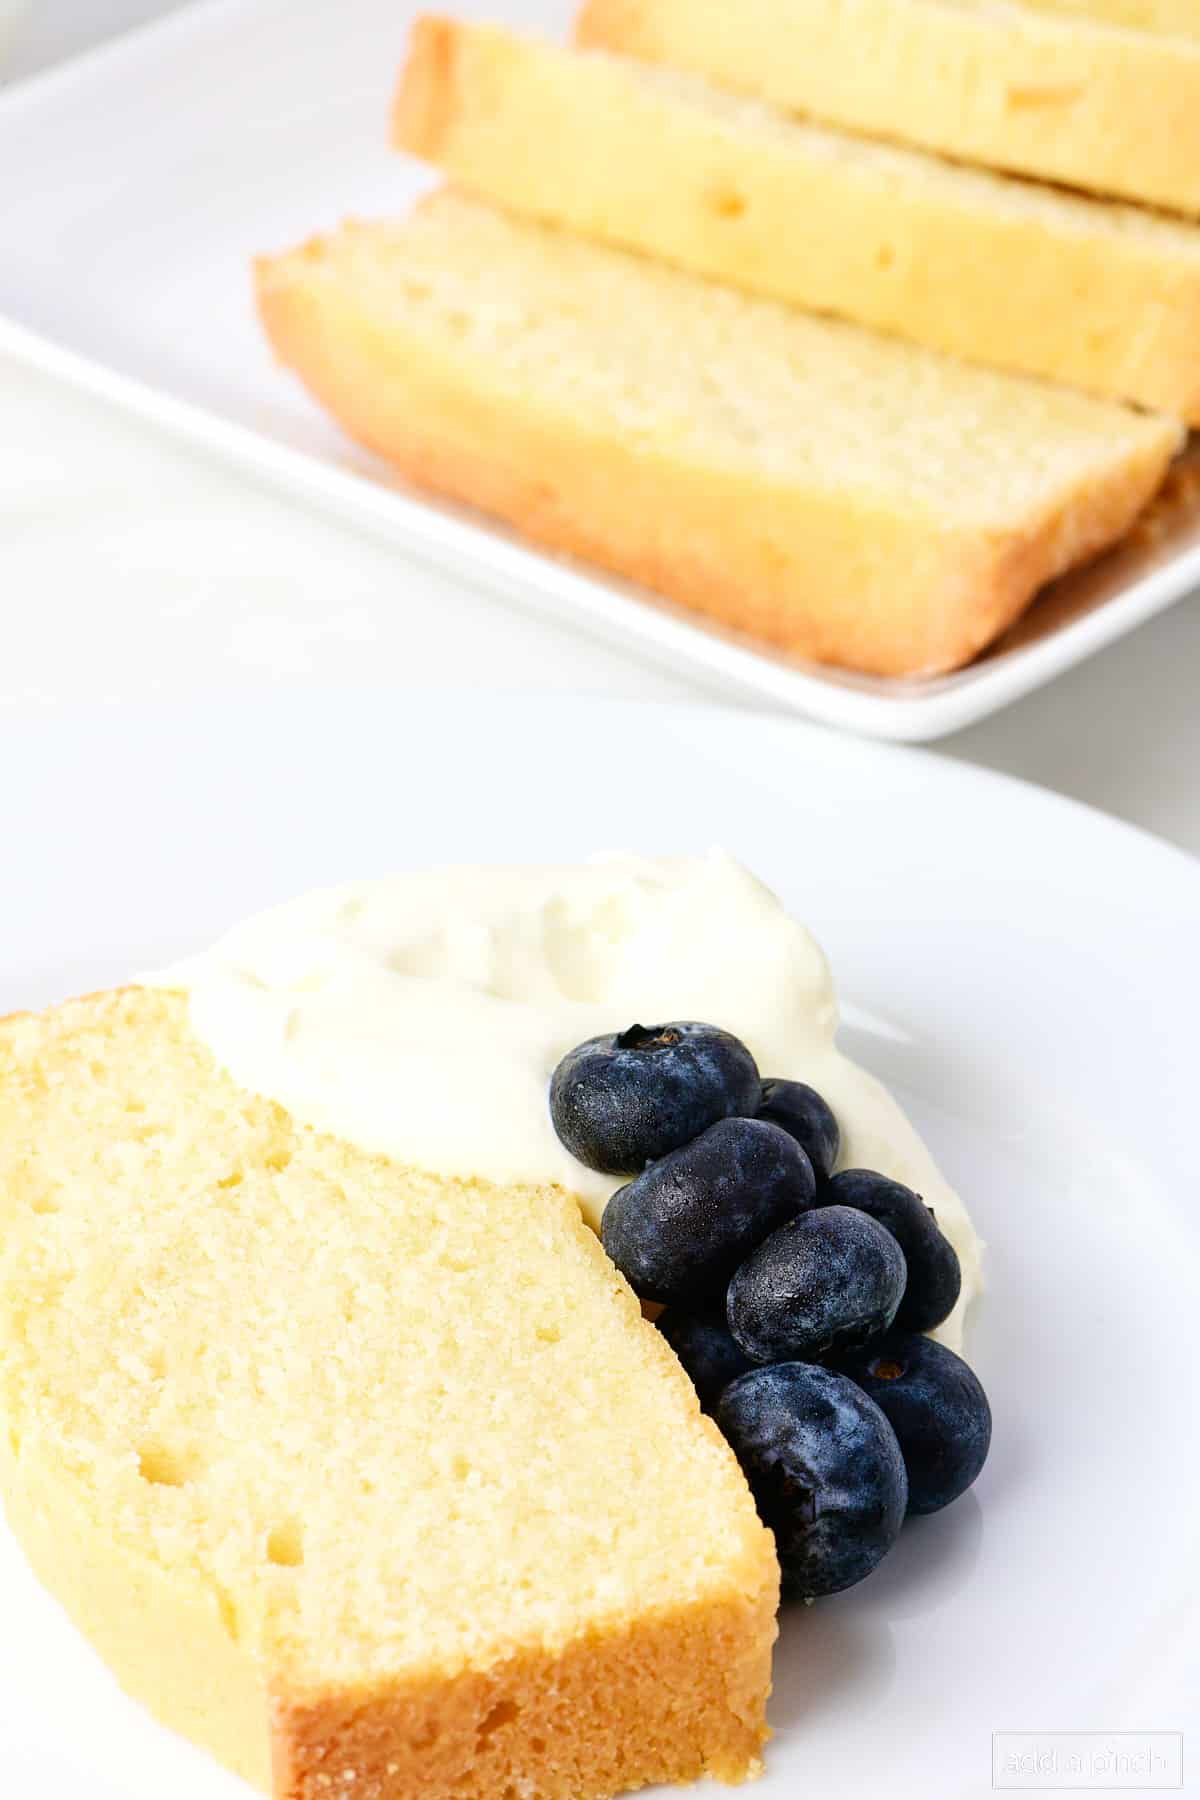 Slice of pound cake garnished with whipping cream and blueberries, with sliced cake in the background on a serving tray.